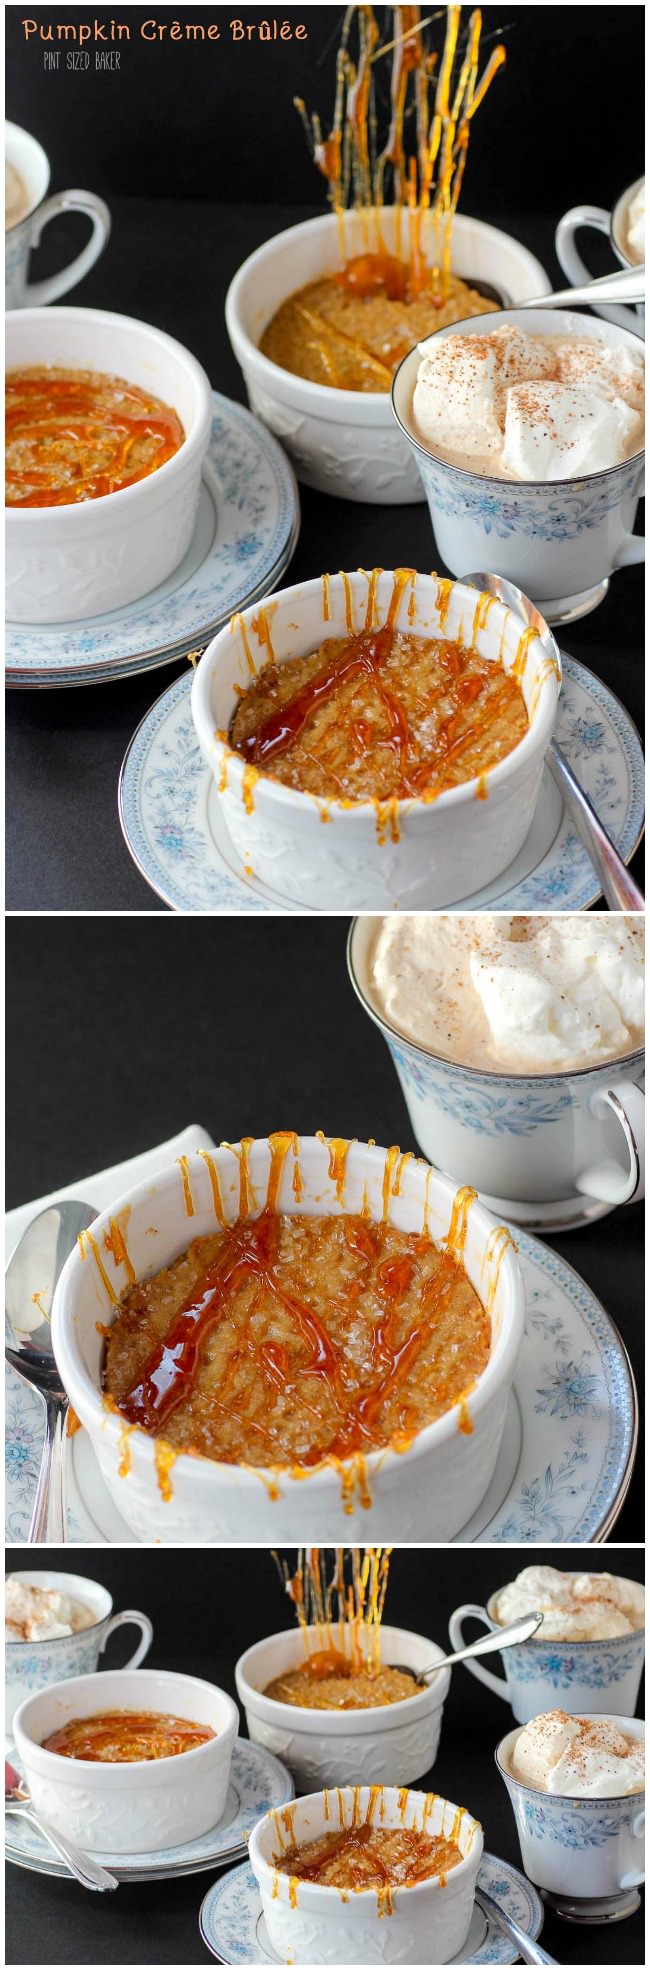 Delicious, smooth and creamy Pumpkin Crème brûlée with no kitchen torch required.